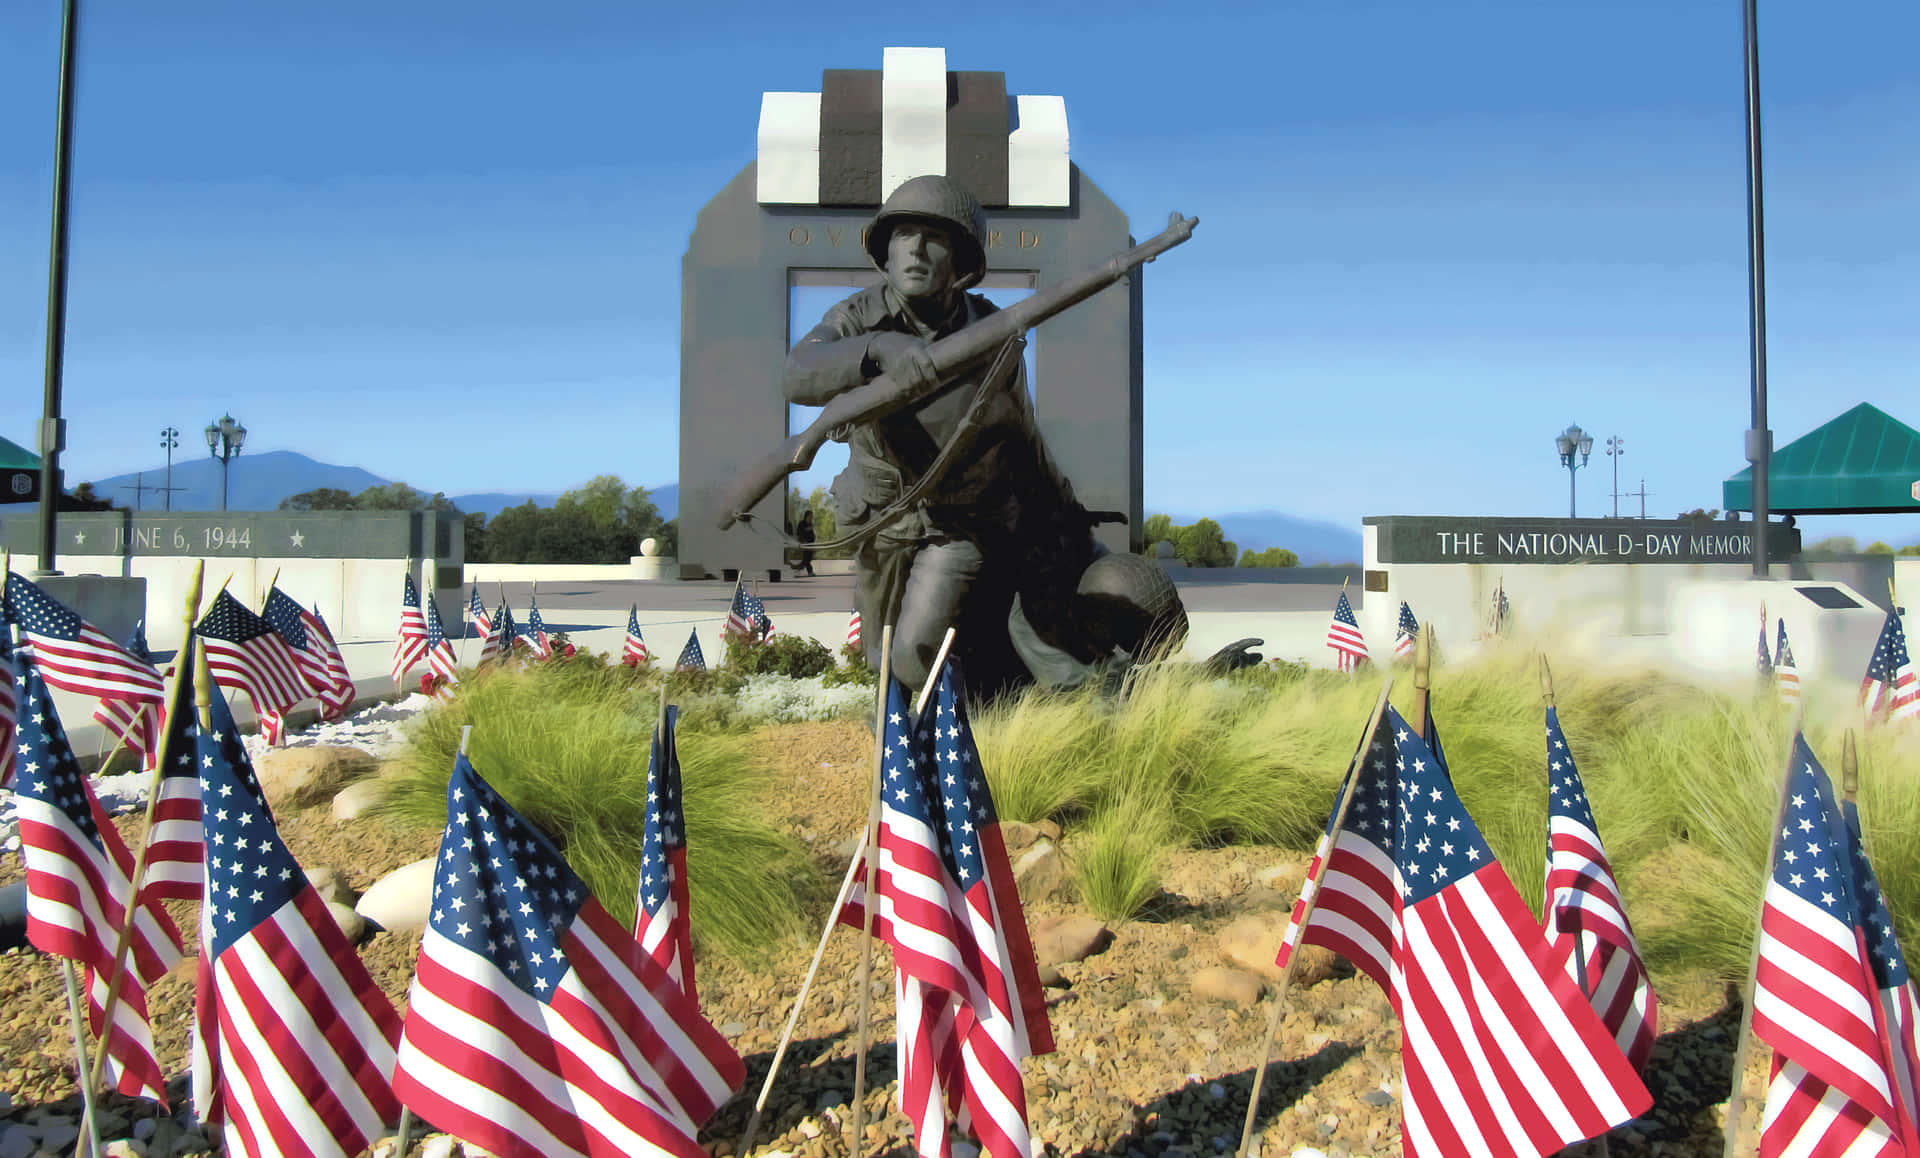 A Statue Of A Soldier With American Flags In Front Of Him